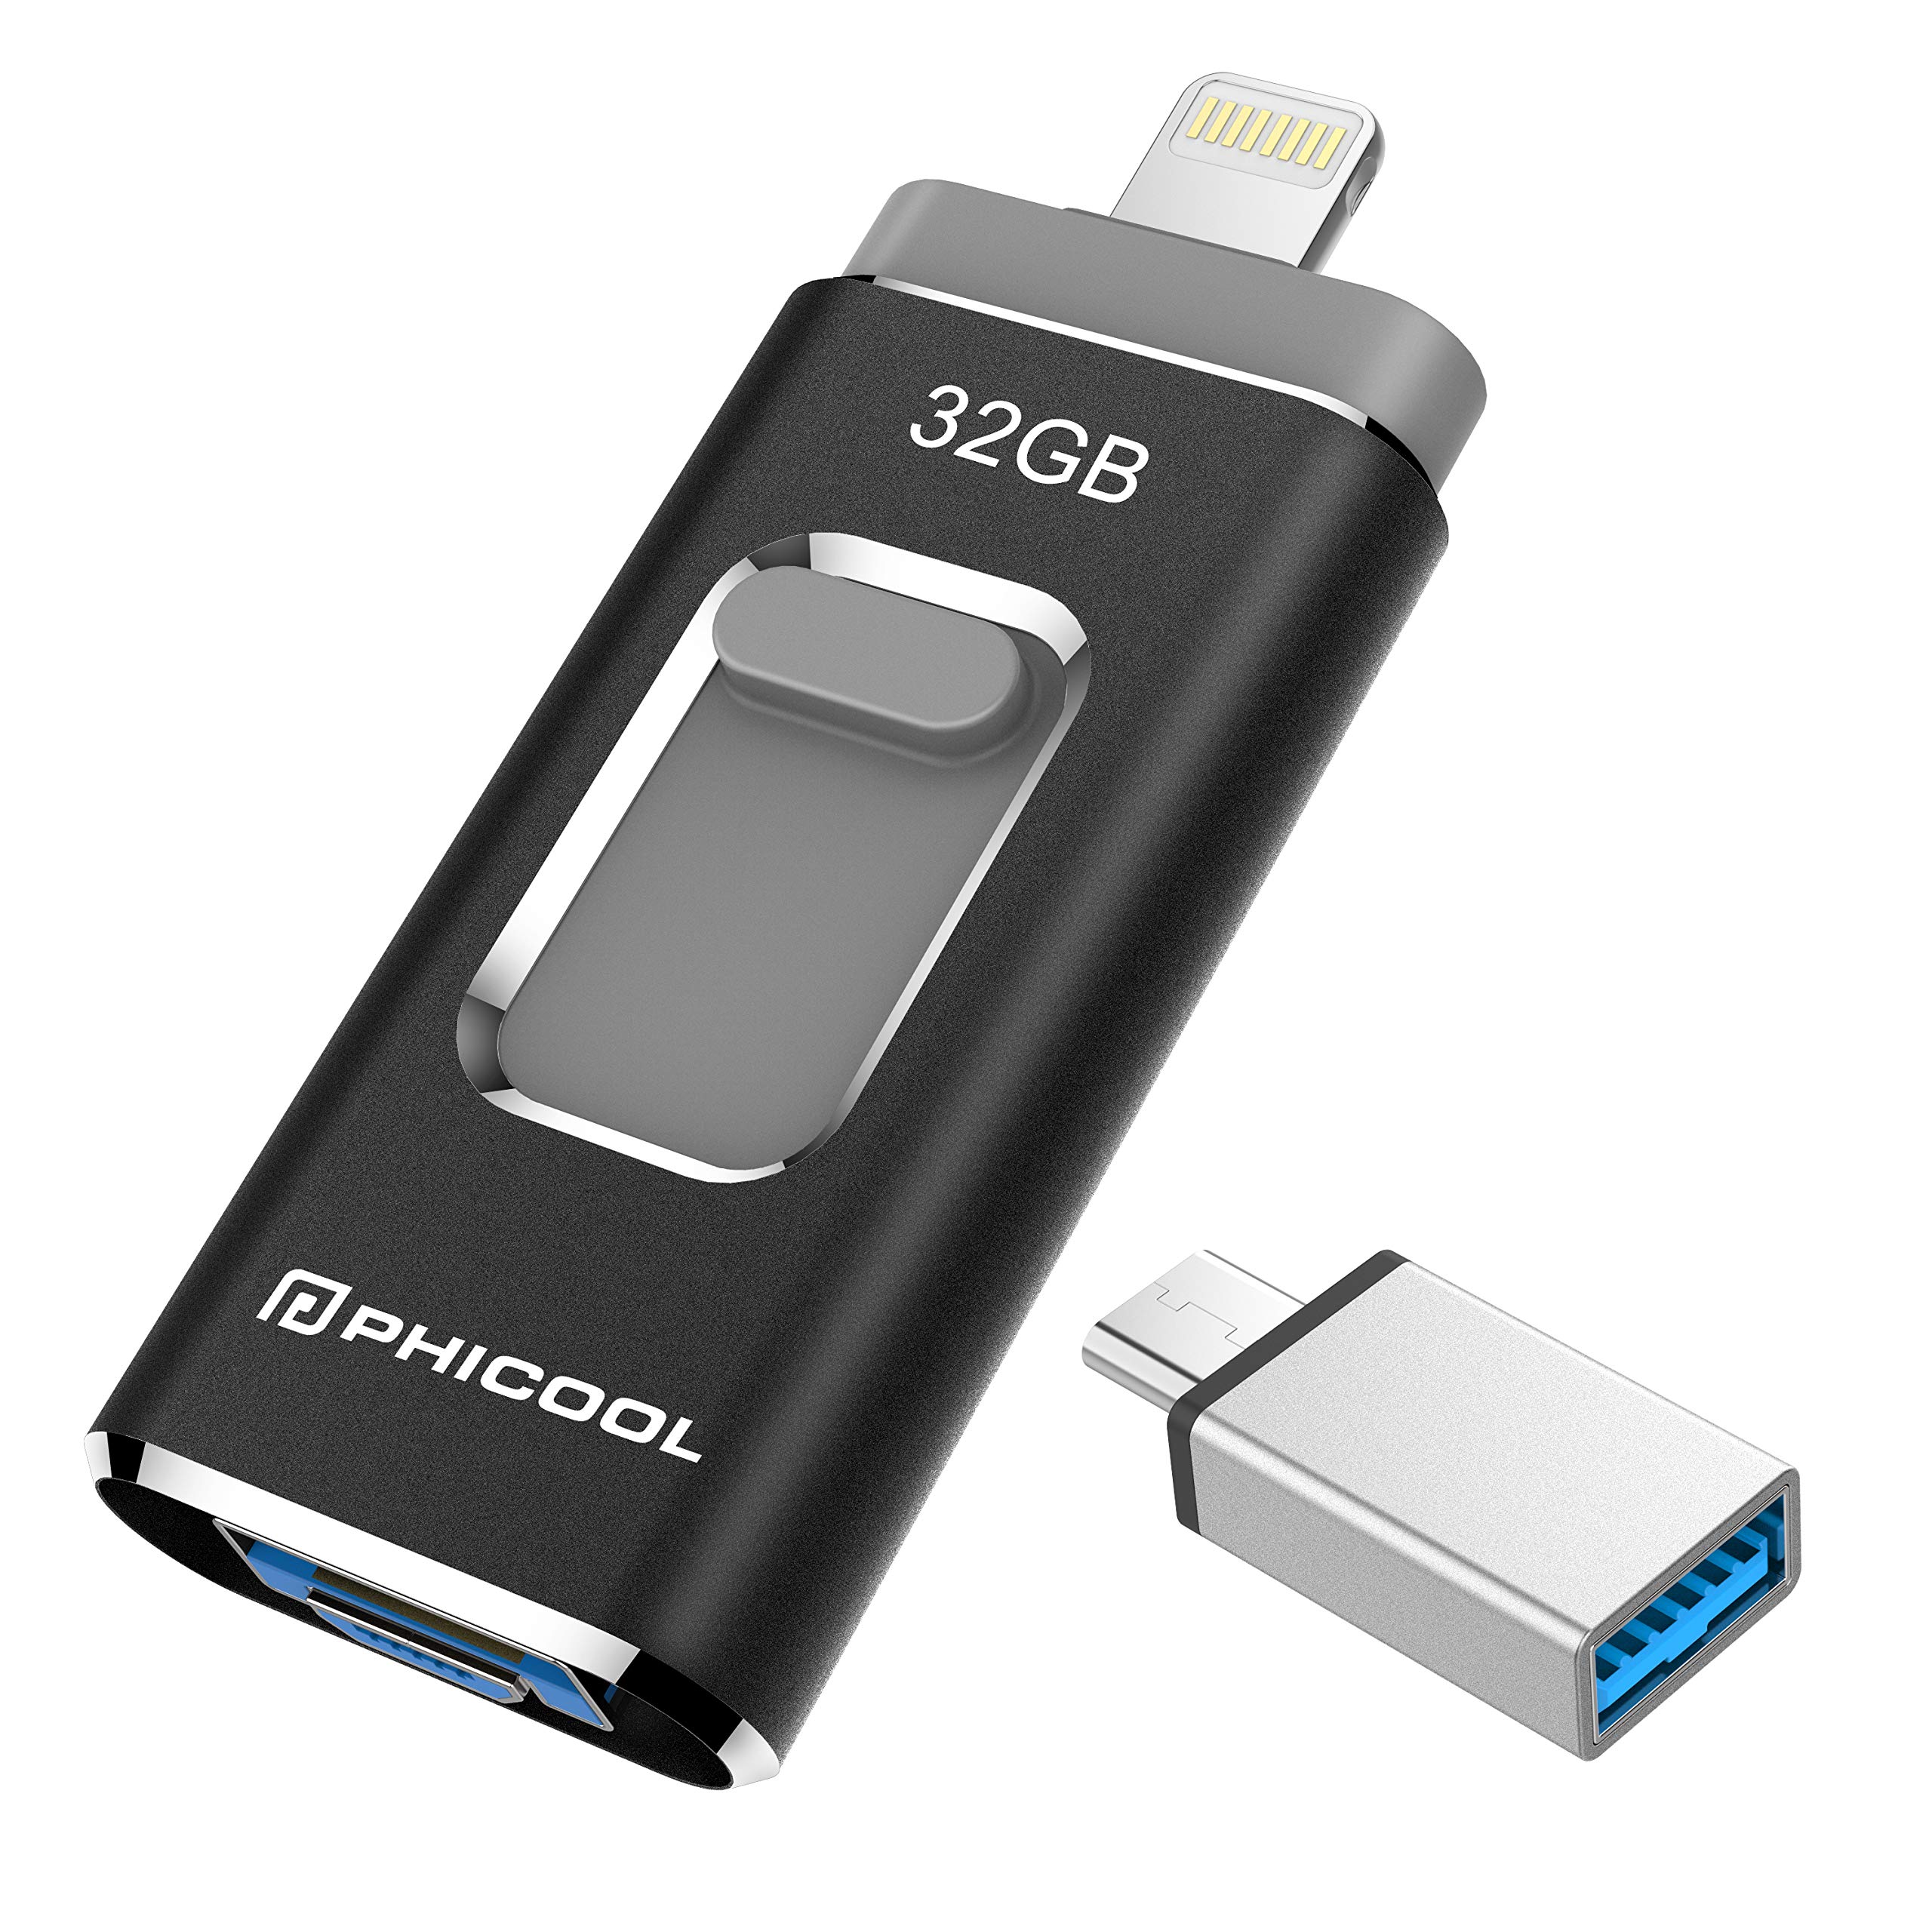 flash drive for iphone